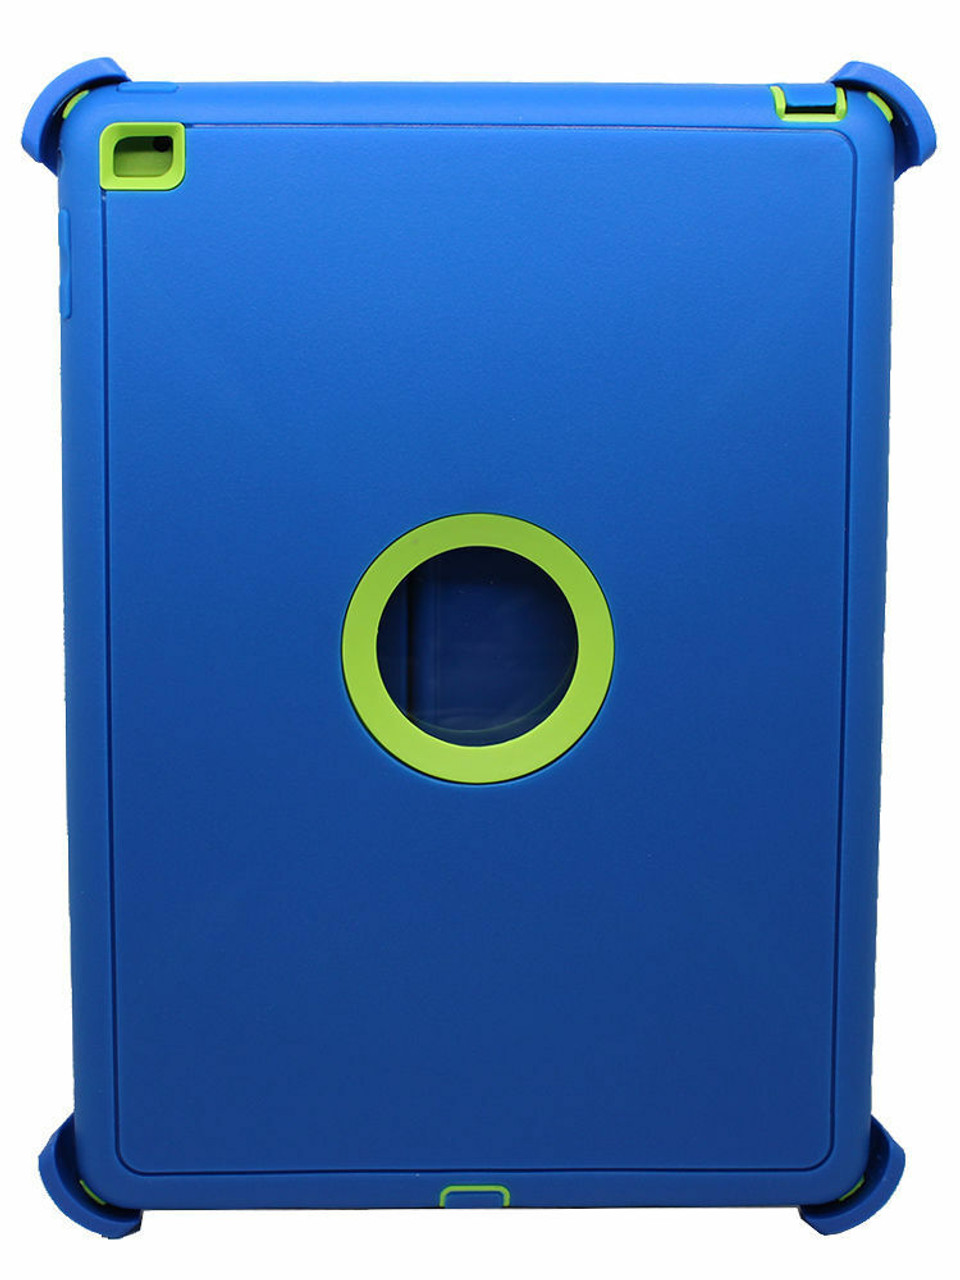 For Apple iPad Air 2 2nd Gen Protective Case Cover Stand Fits Otterbox Defender